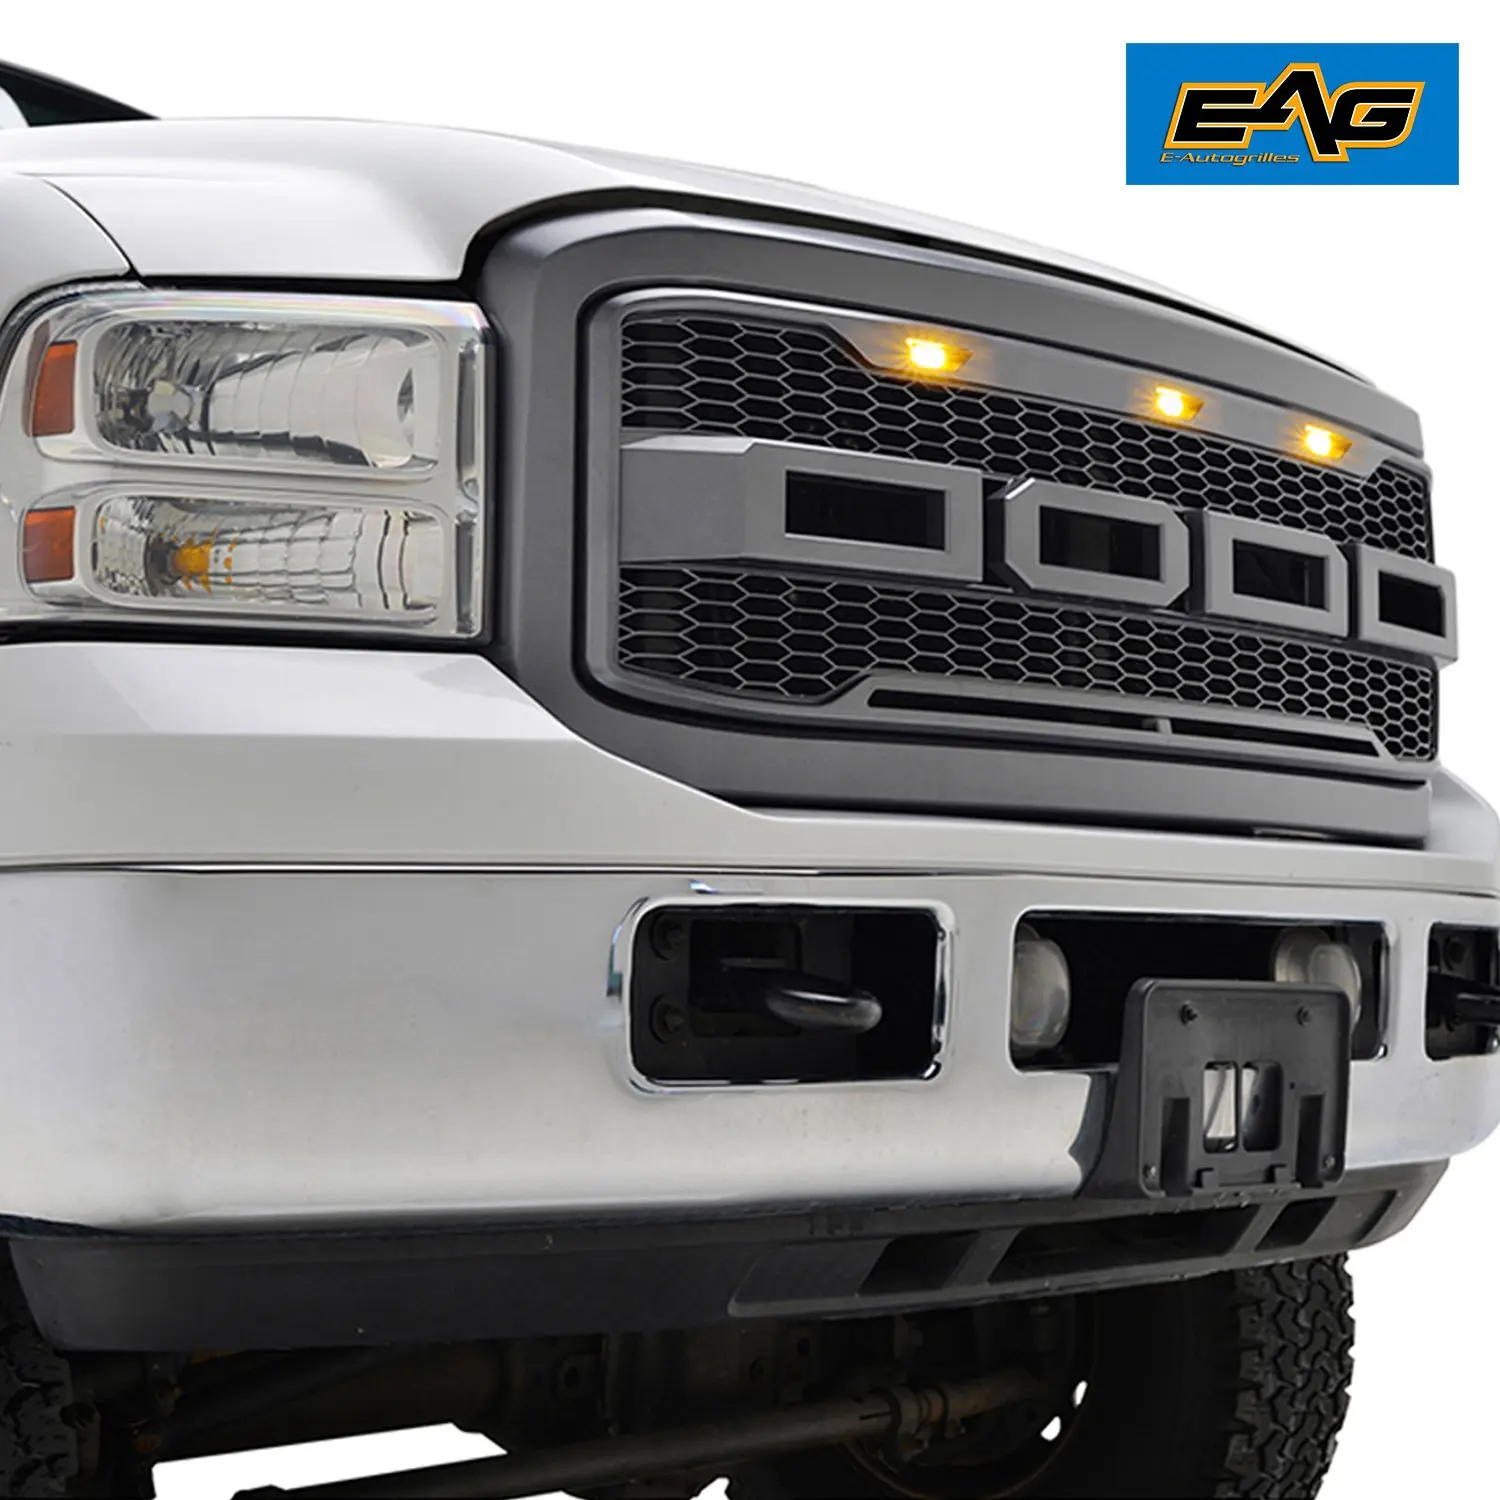 EAG Replacement Super Duty ABS Grille - Charcoal Gray - With Amber LED Ligh...